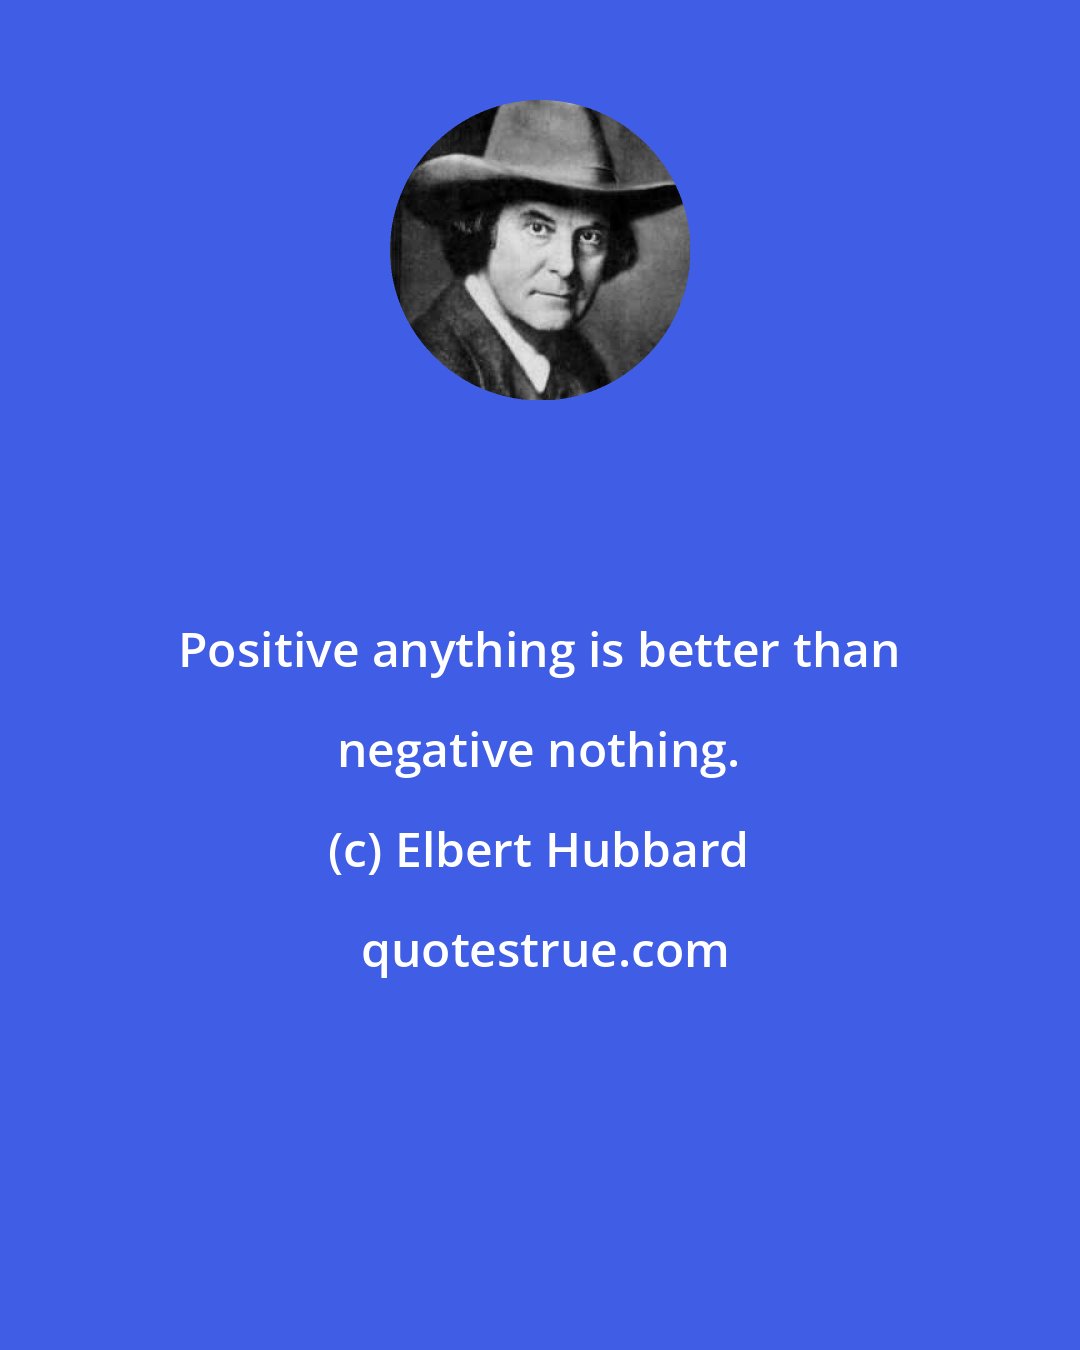 Elbert Hubbard: Positive anything is better than negative nothing.